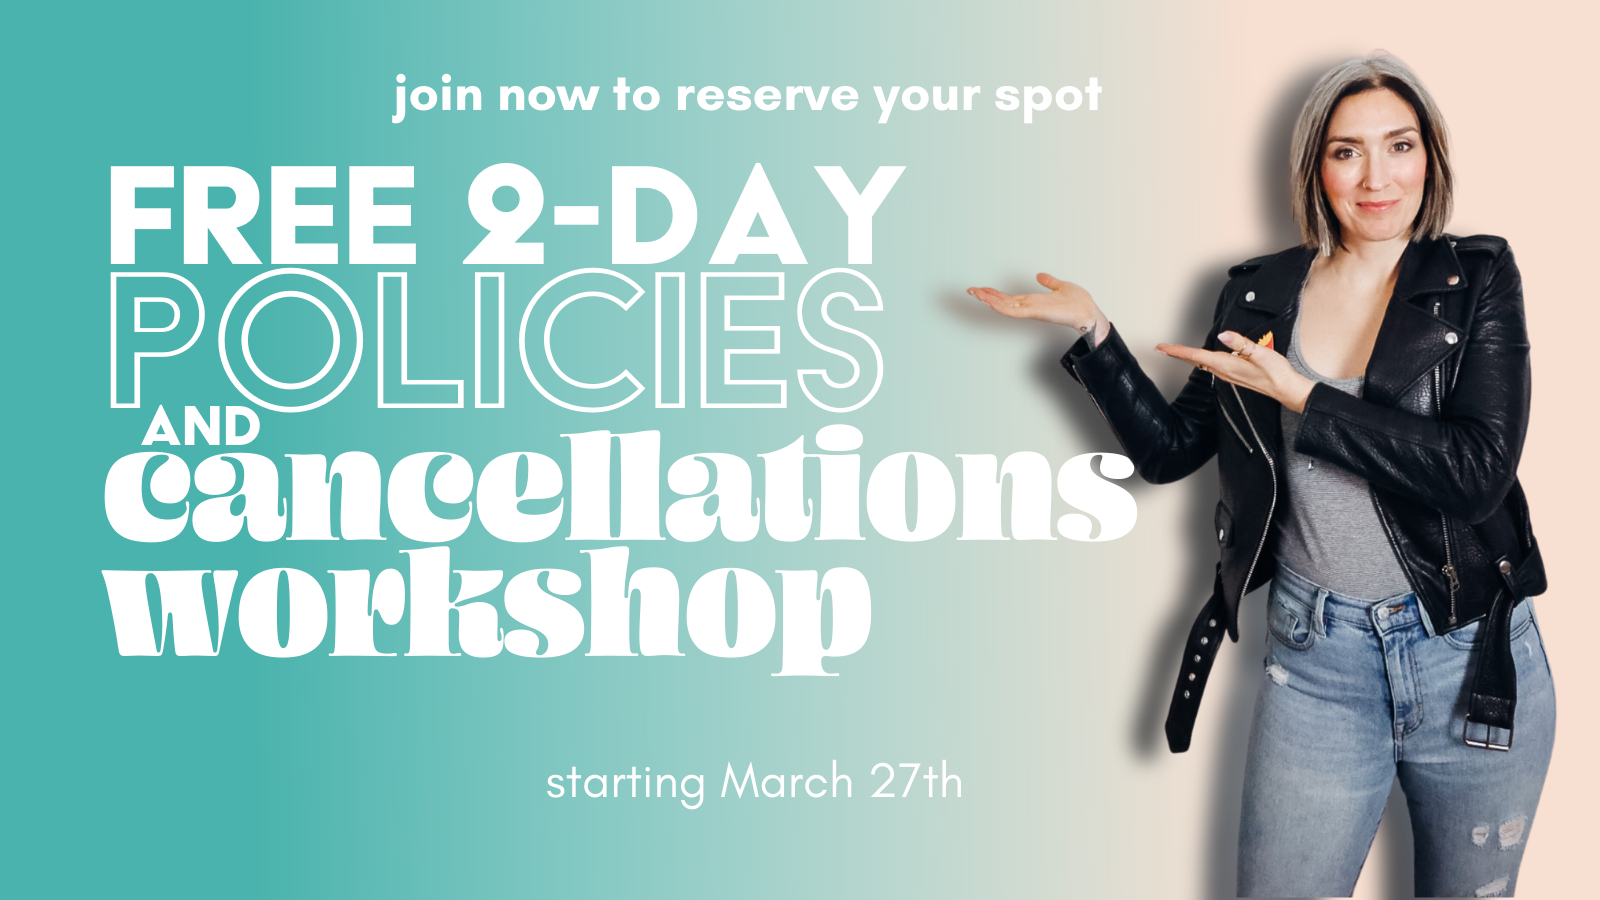 Dawn stands wearing blue jeans and a leather jacket with her hands outstretched towards the text overlay which reads "join now to reserve your spot free 2-day policies and cancellations workshop starting march 27th"